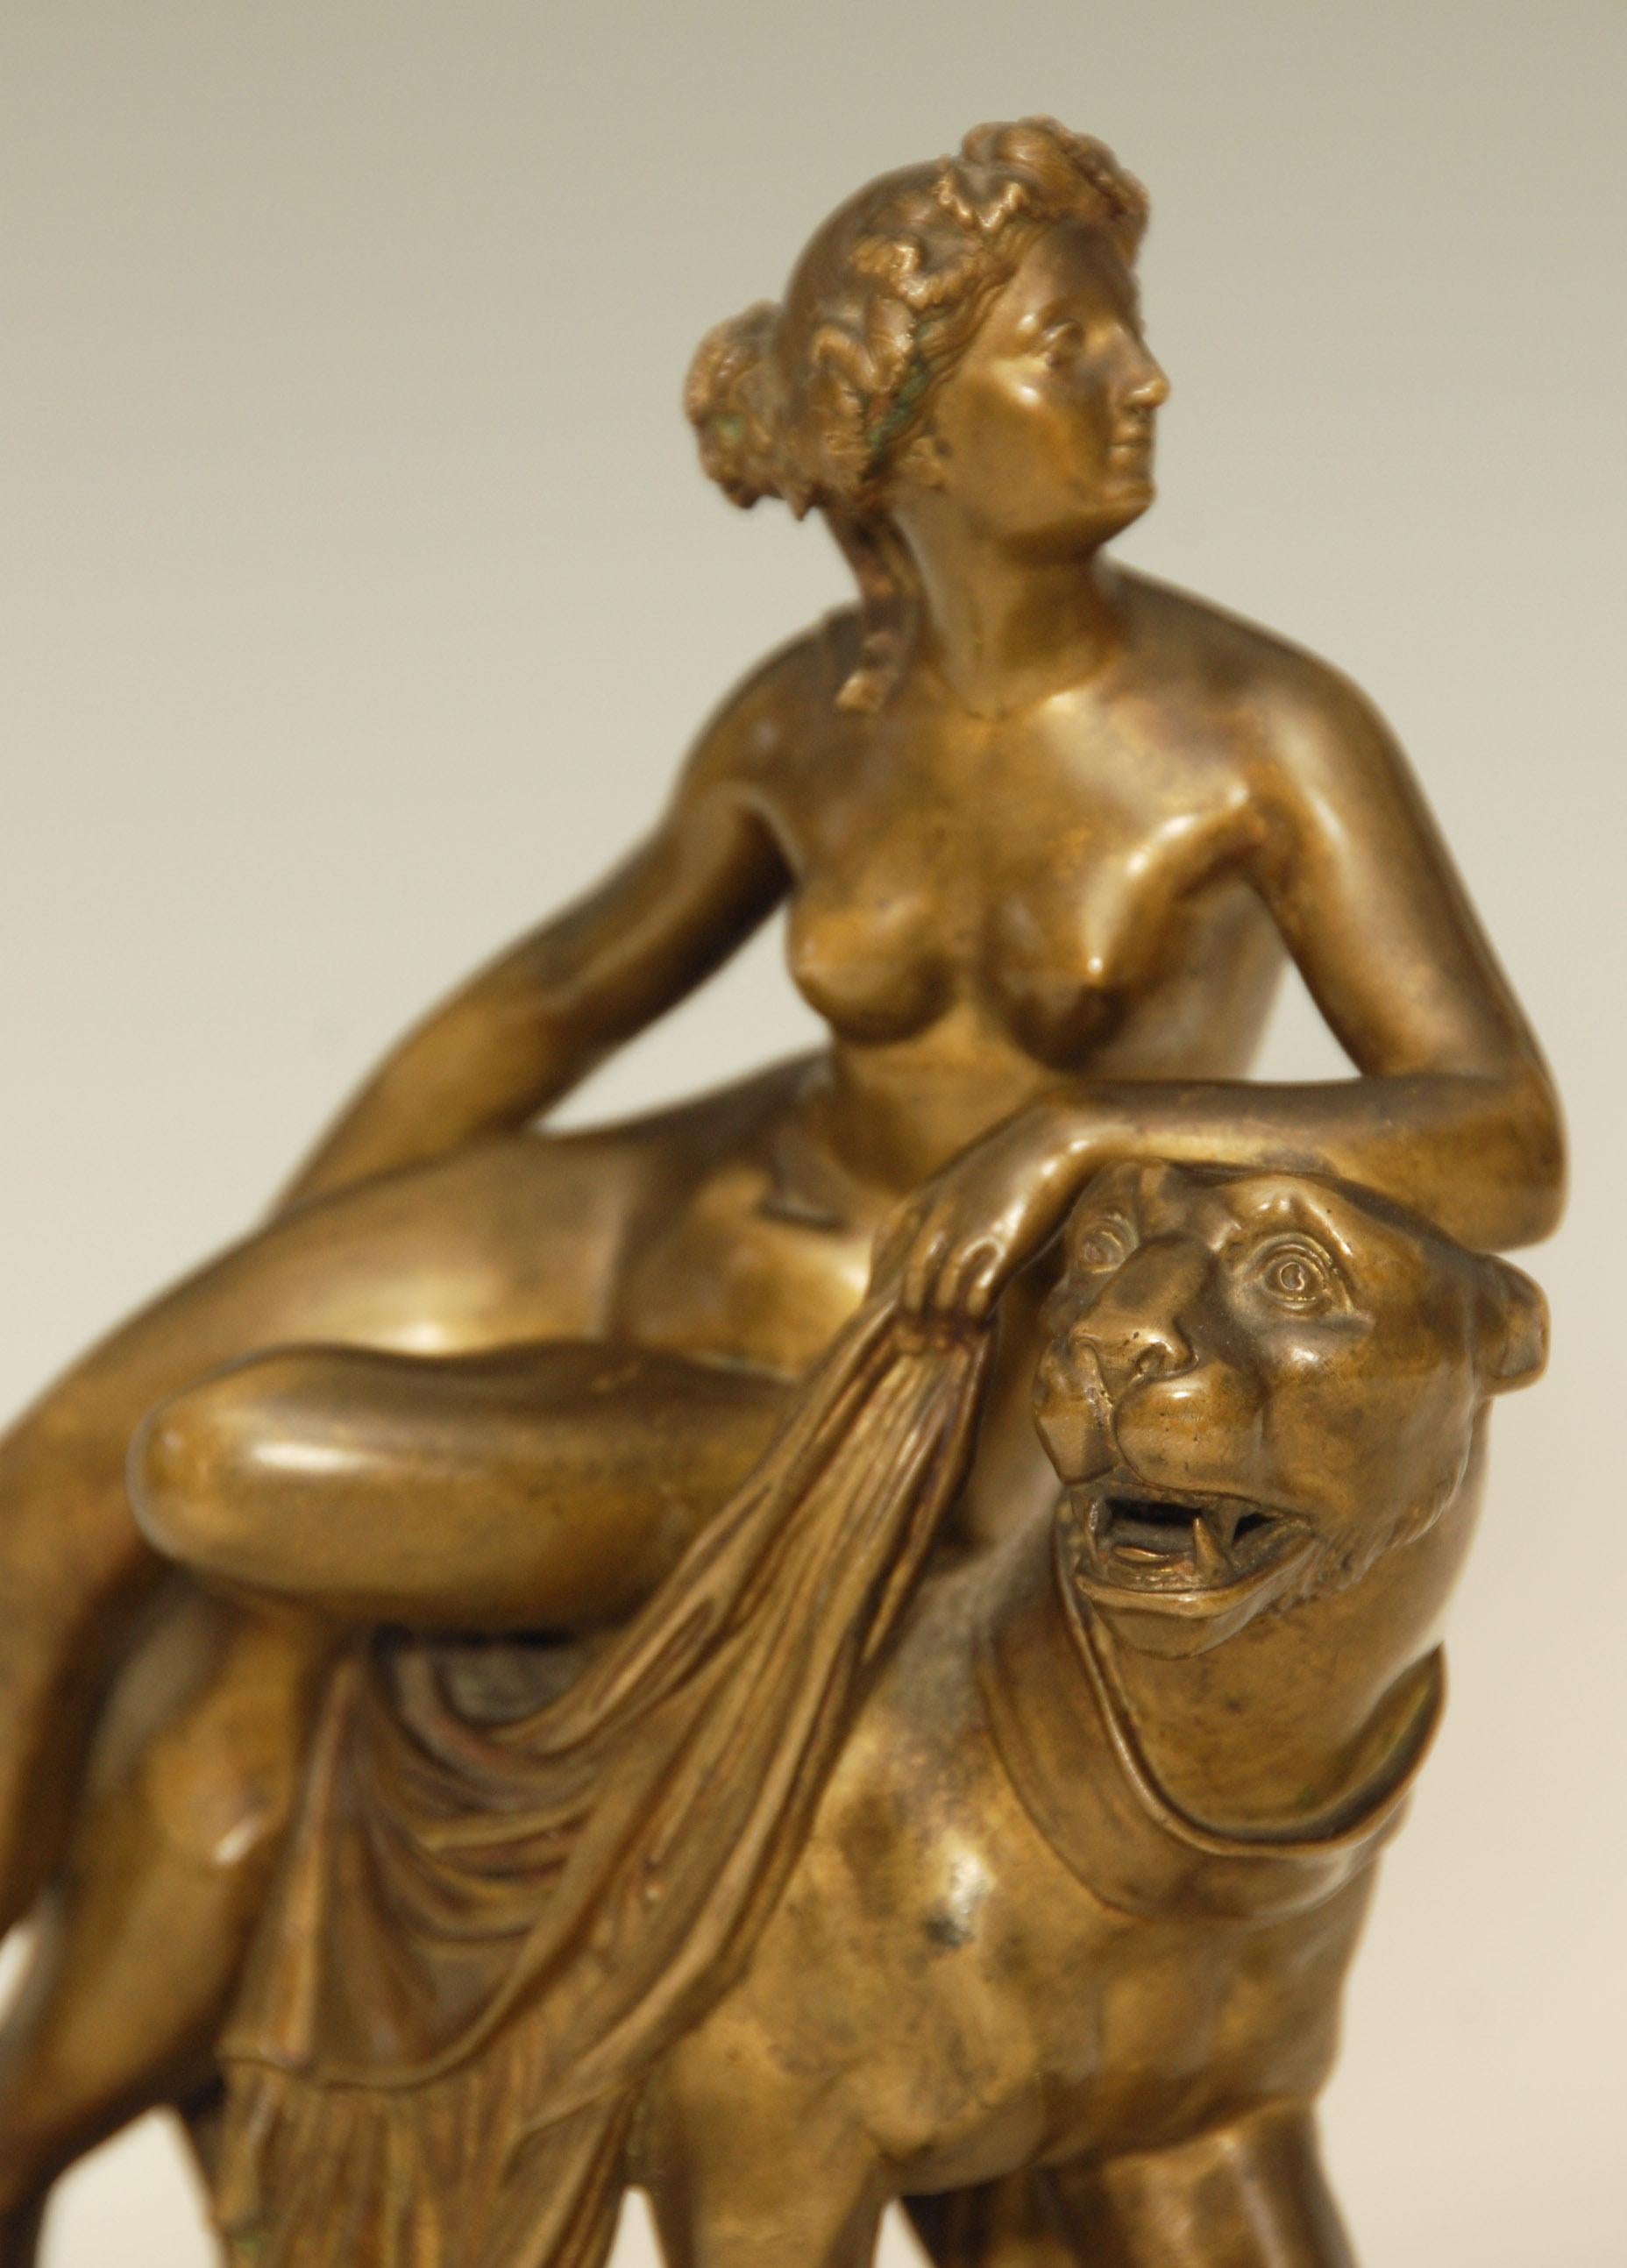 A very stylish 19th century bronze of a naked female riding on a lion mounted on a sienna and white marble base.

Price includes free shipping to anywhere in the world.